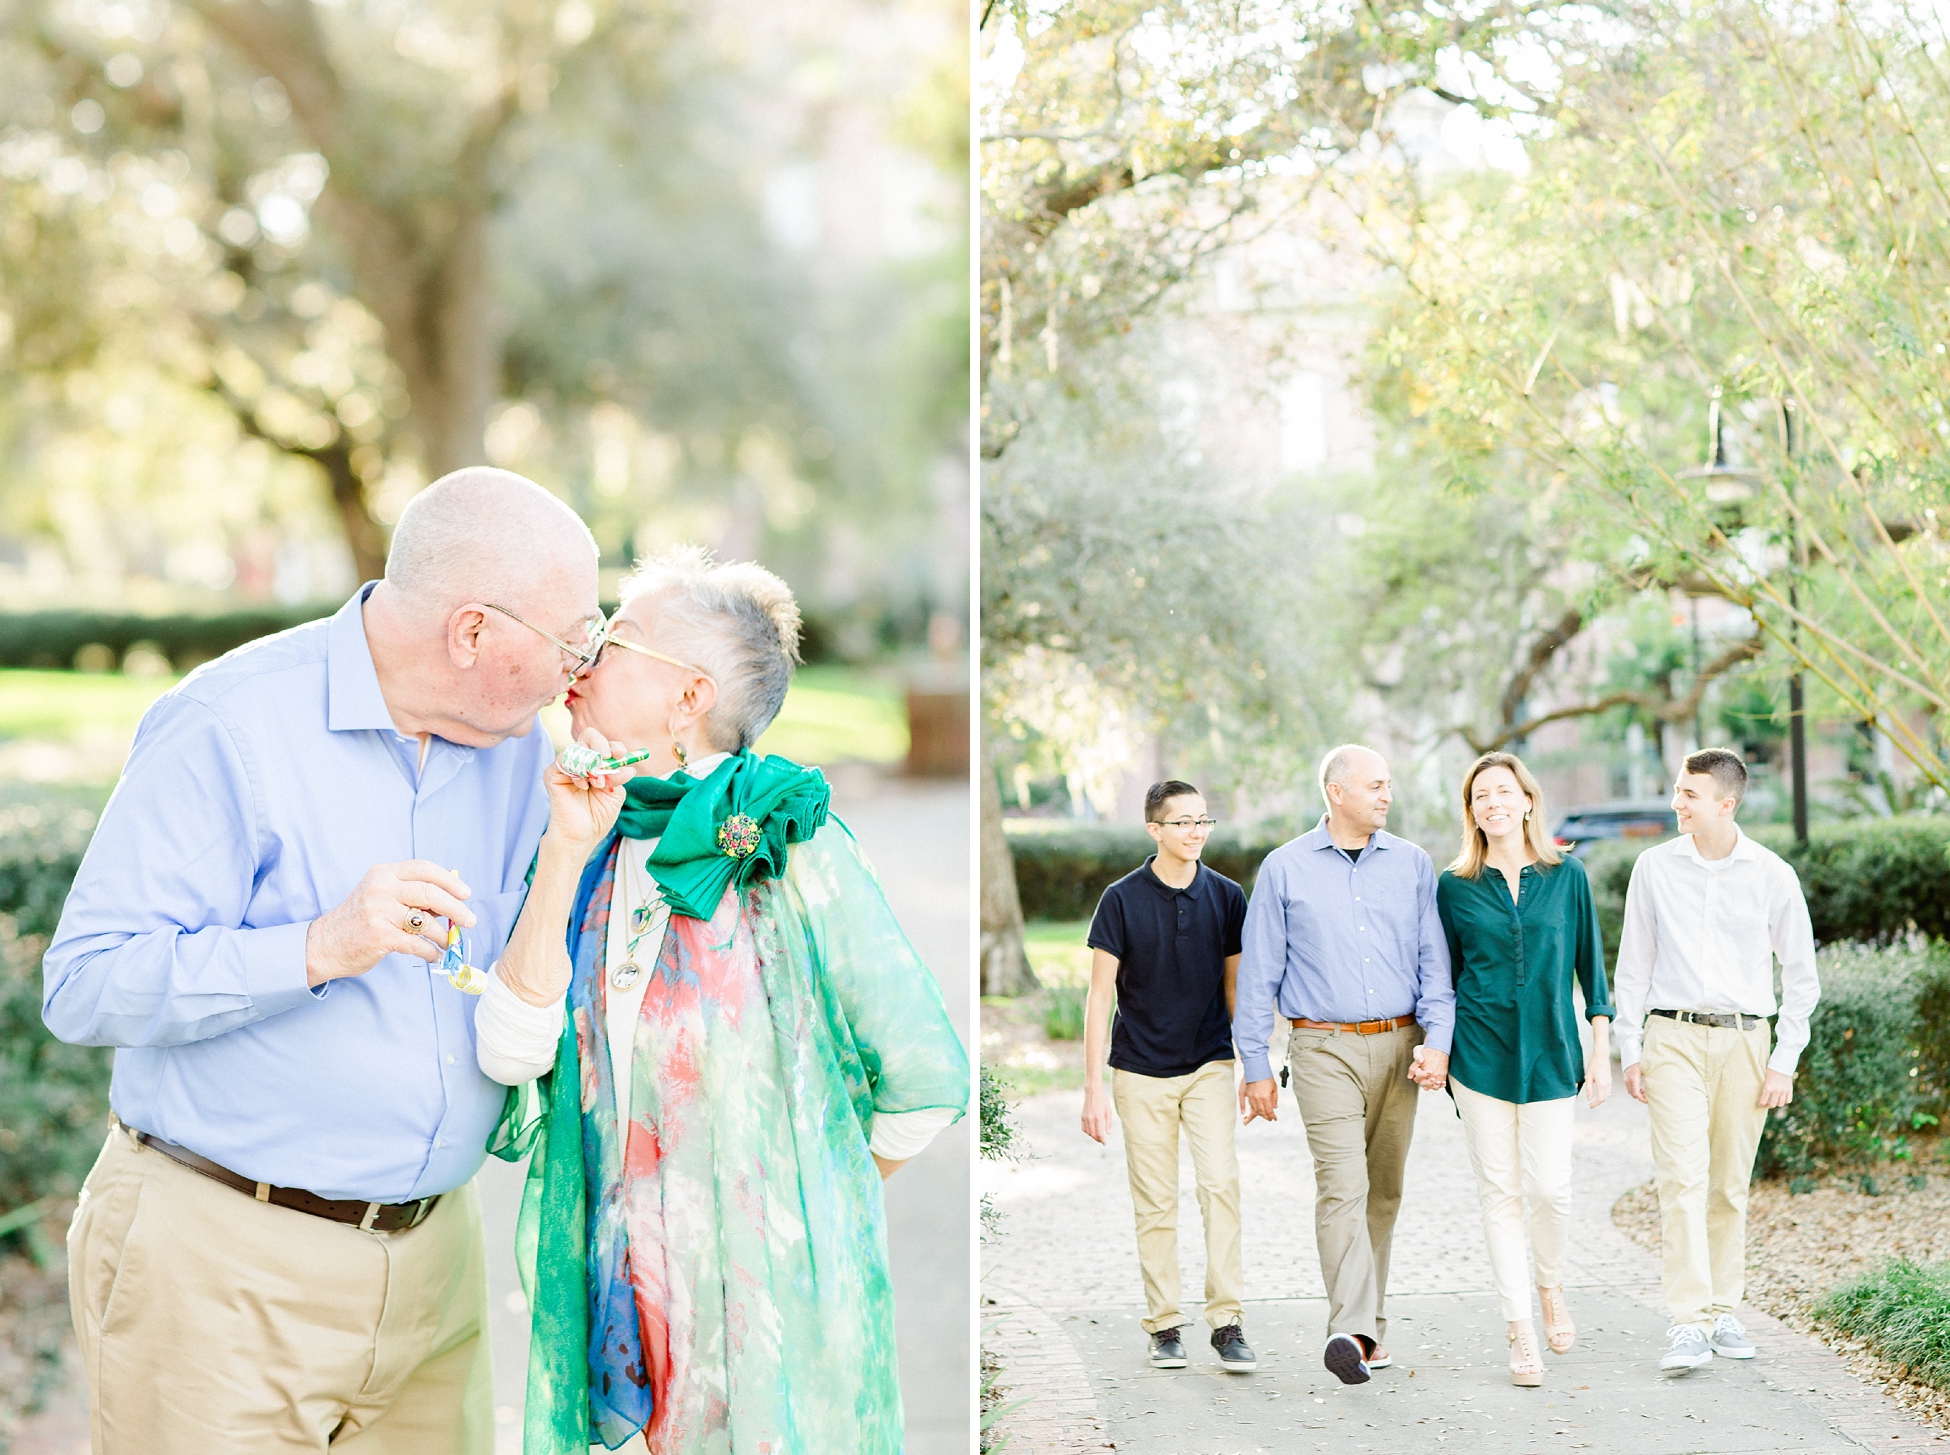 Tampa Family Photographer | © Ailyn La Torre Photography 2018